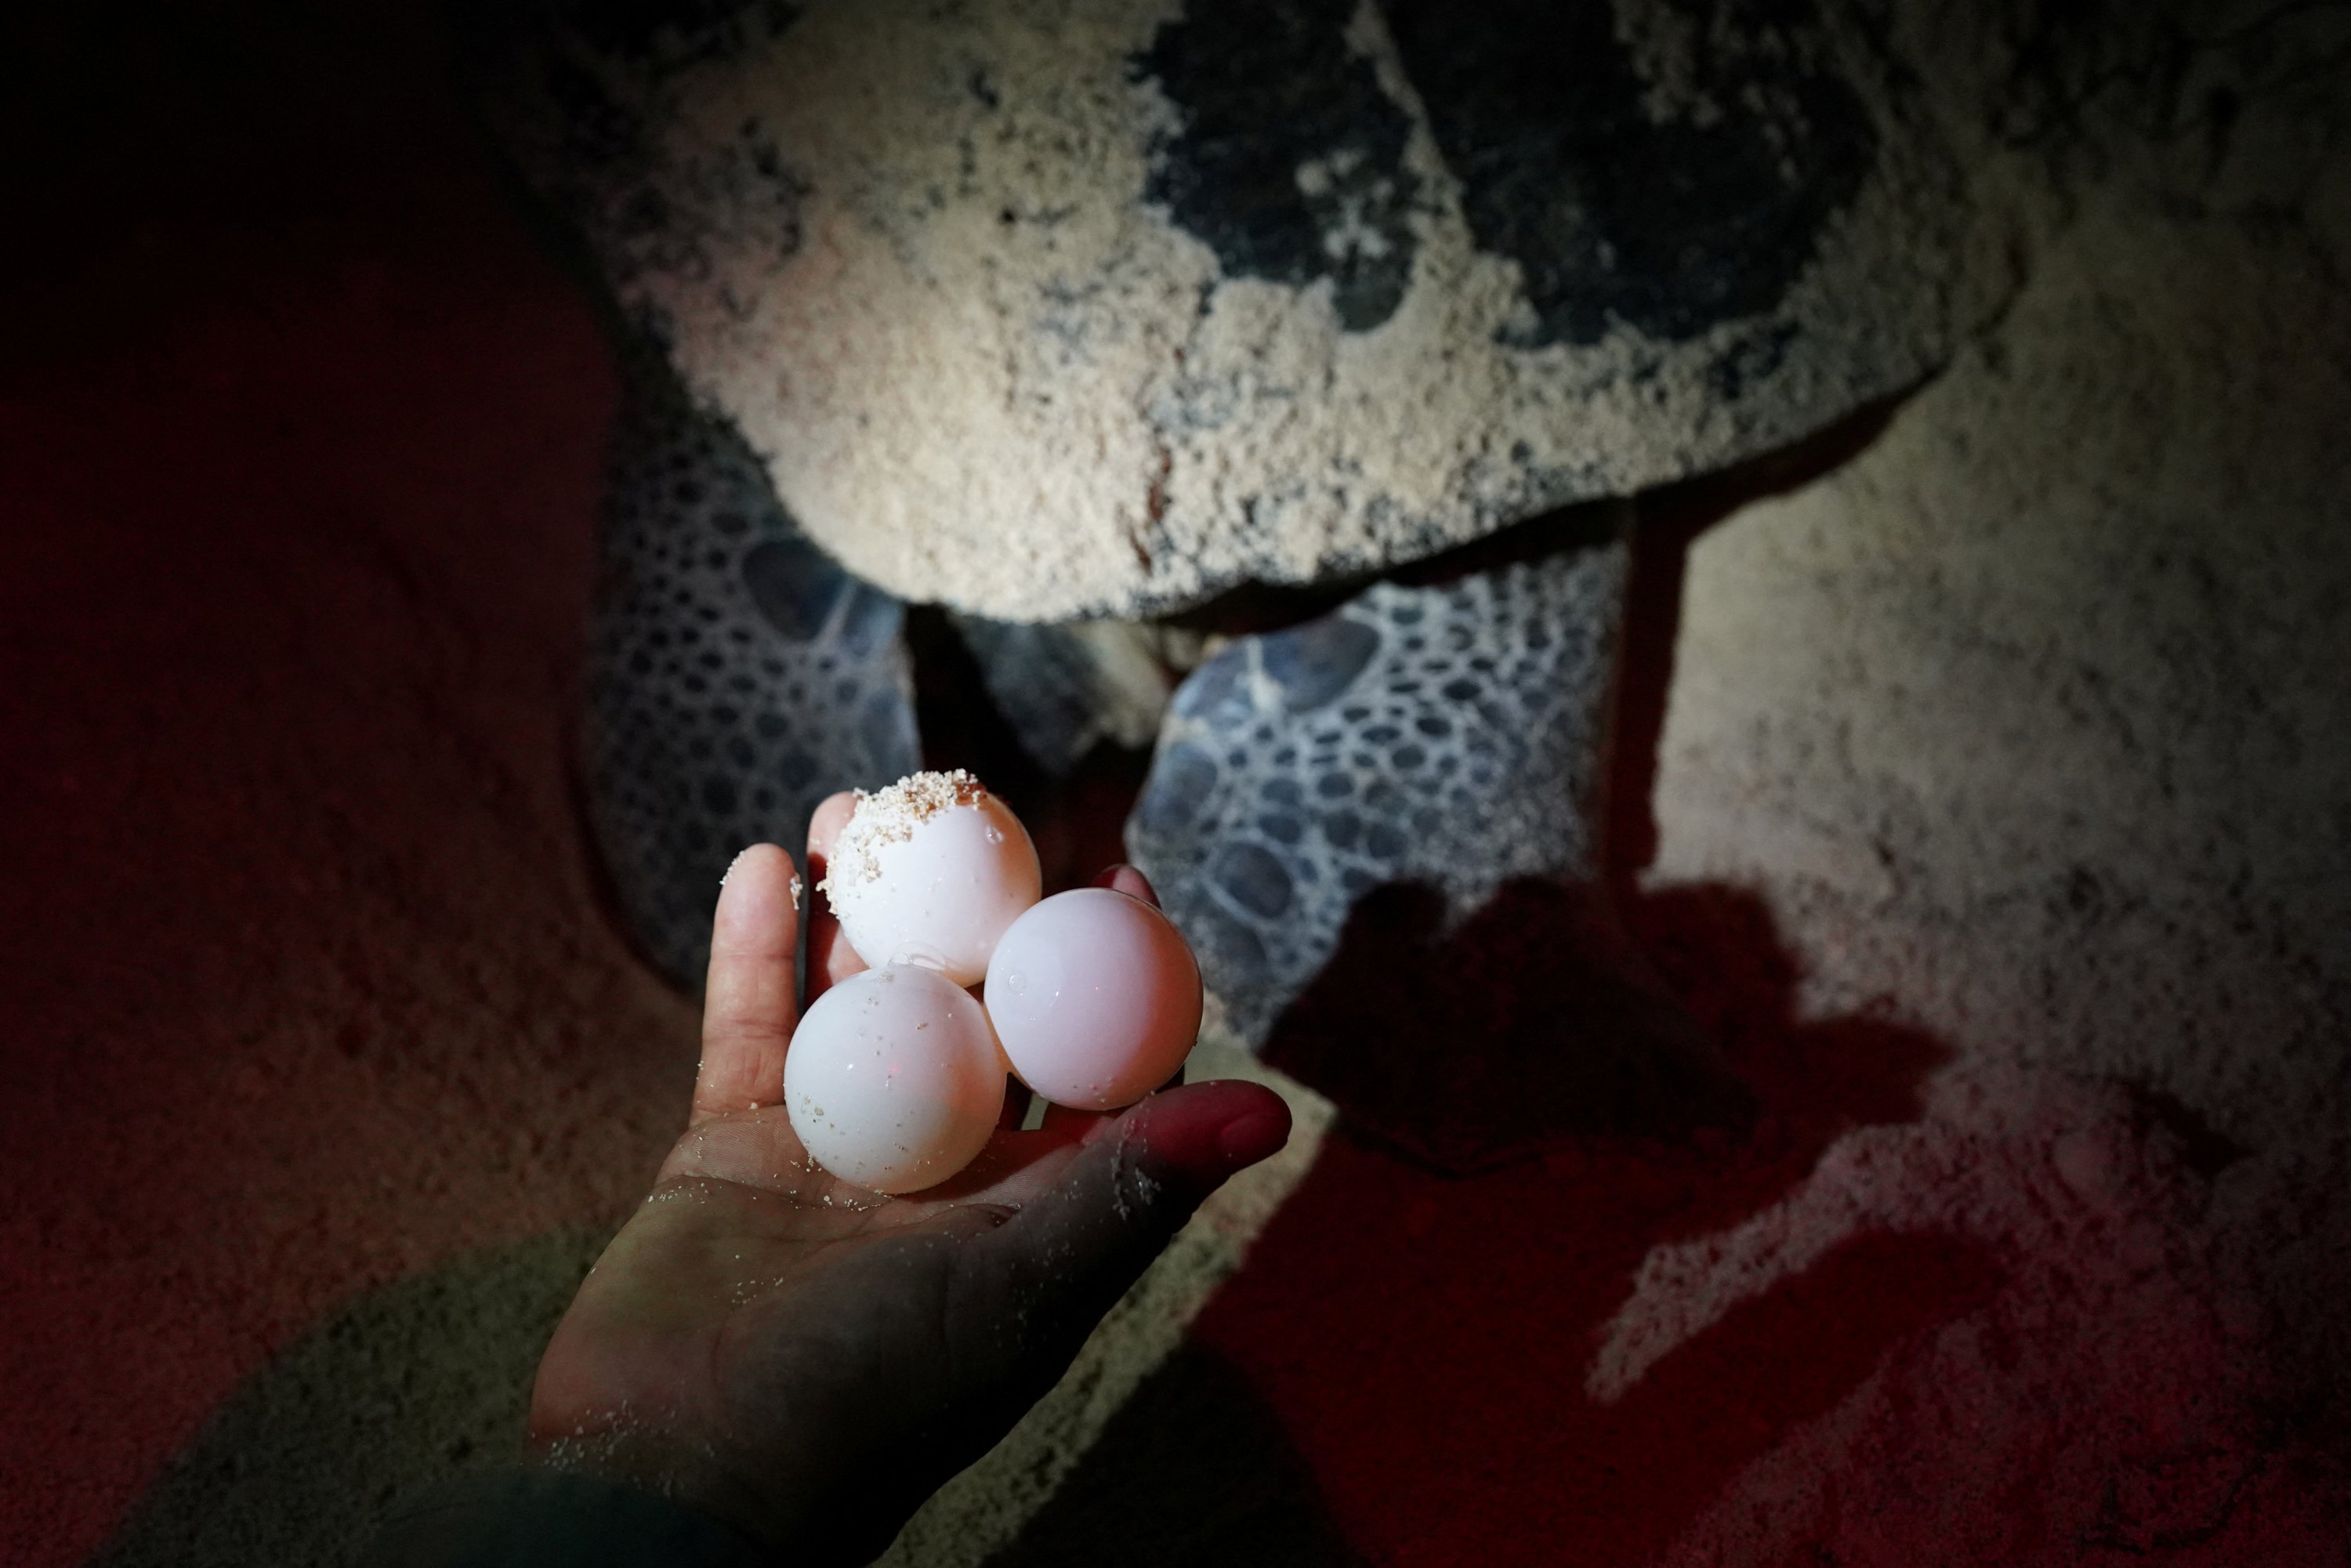 Park guard Roberto Varella shows the eggs of a green sea turtle on the beach in Guanahacabibes Peninsula, Cuba, June 27, 2022. (Reuters Photo)